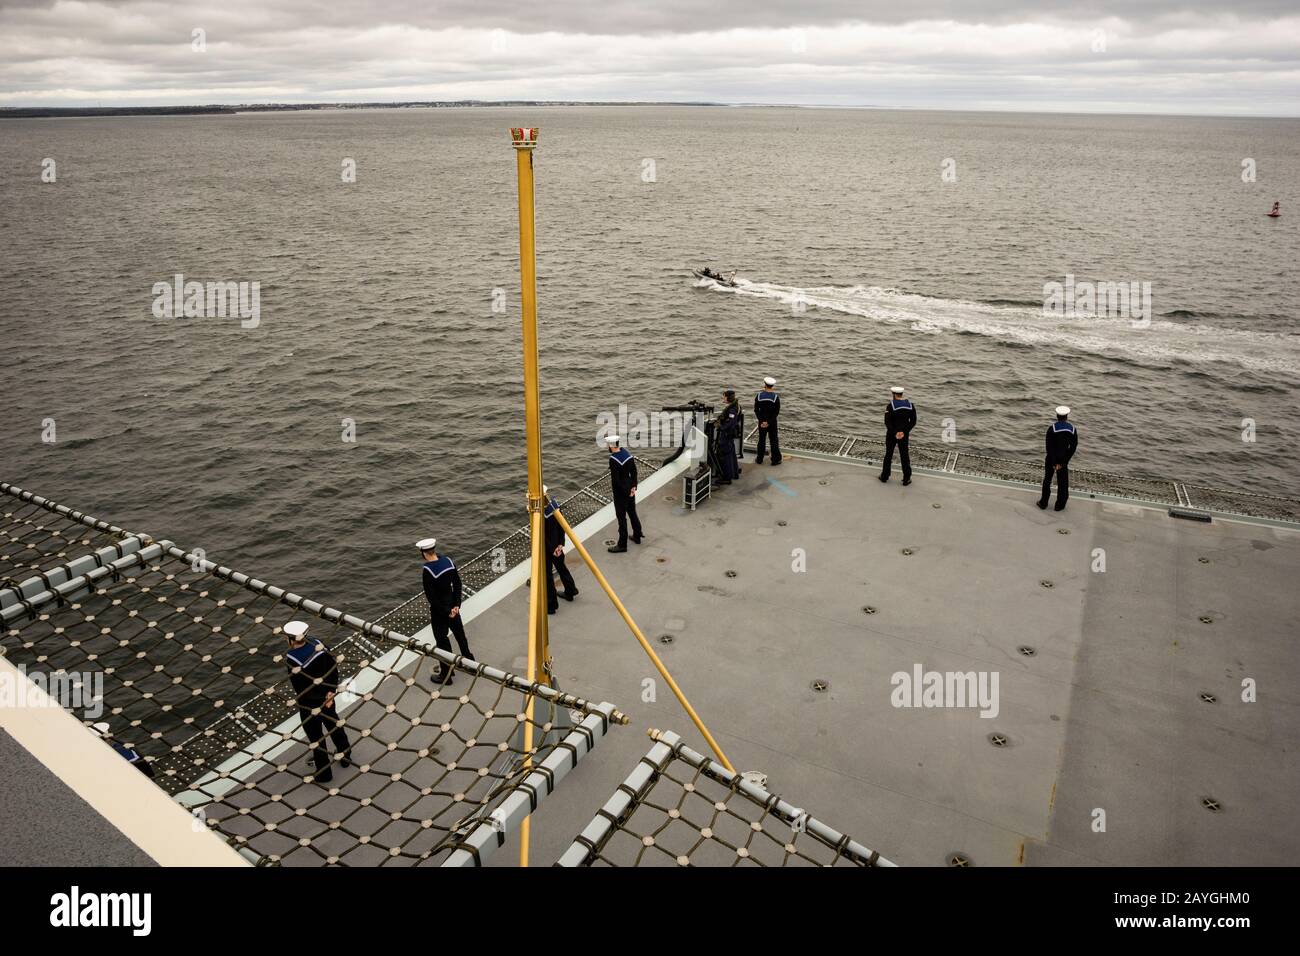 Sailors man the rails of the Royal Navy's aircraft carrier HMS QUEEN ELIZABETH during her arrival in Halifax, Nova Scotia, Canada. Stock Photo